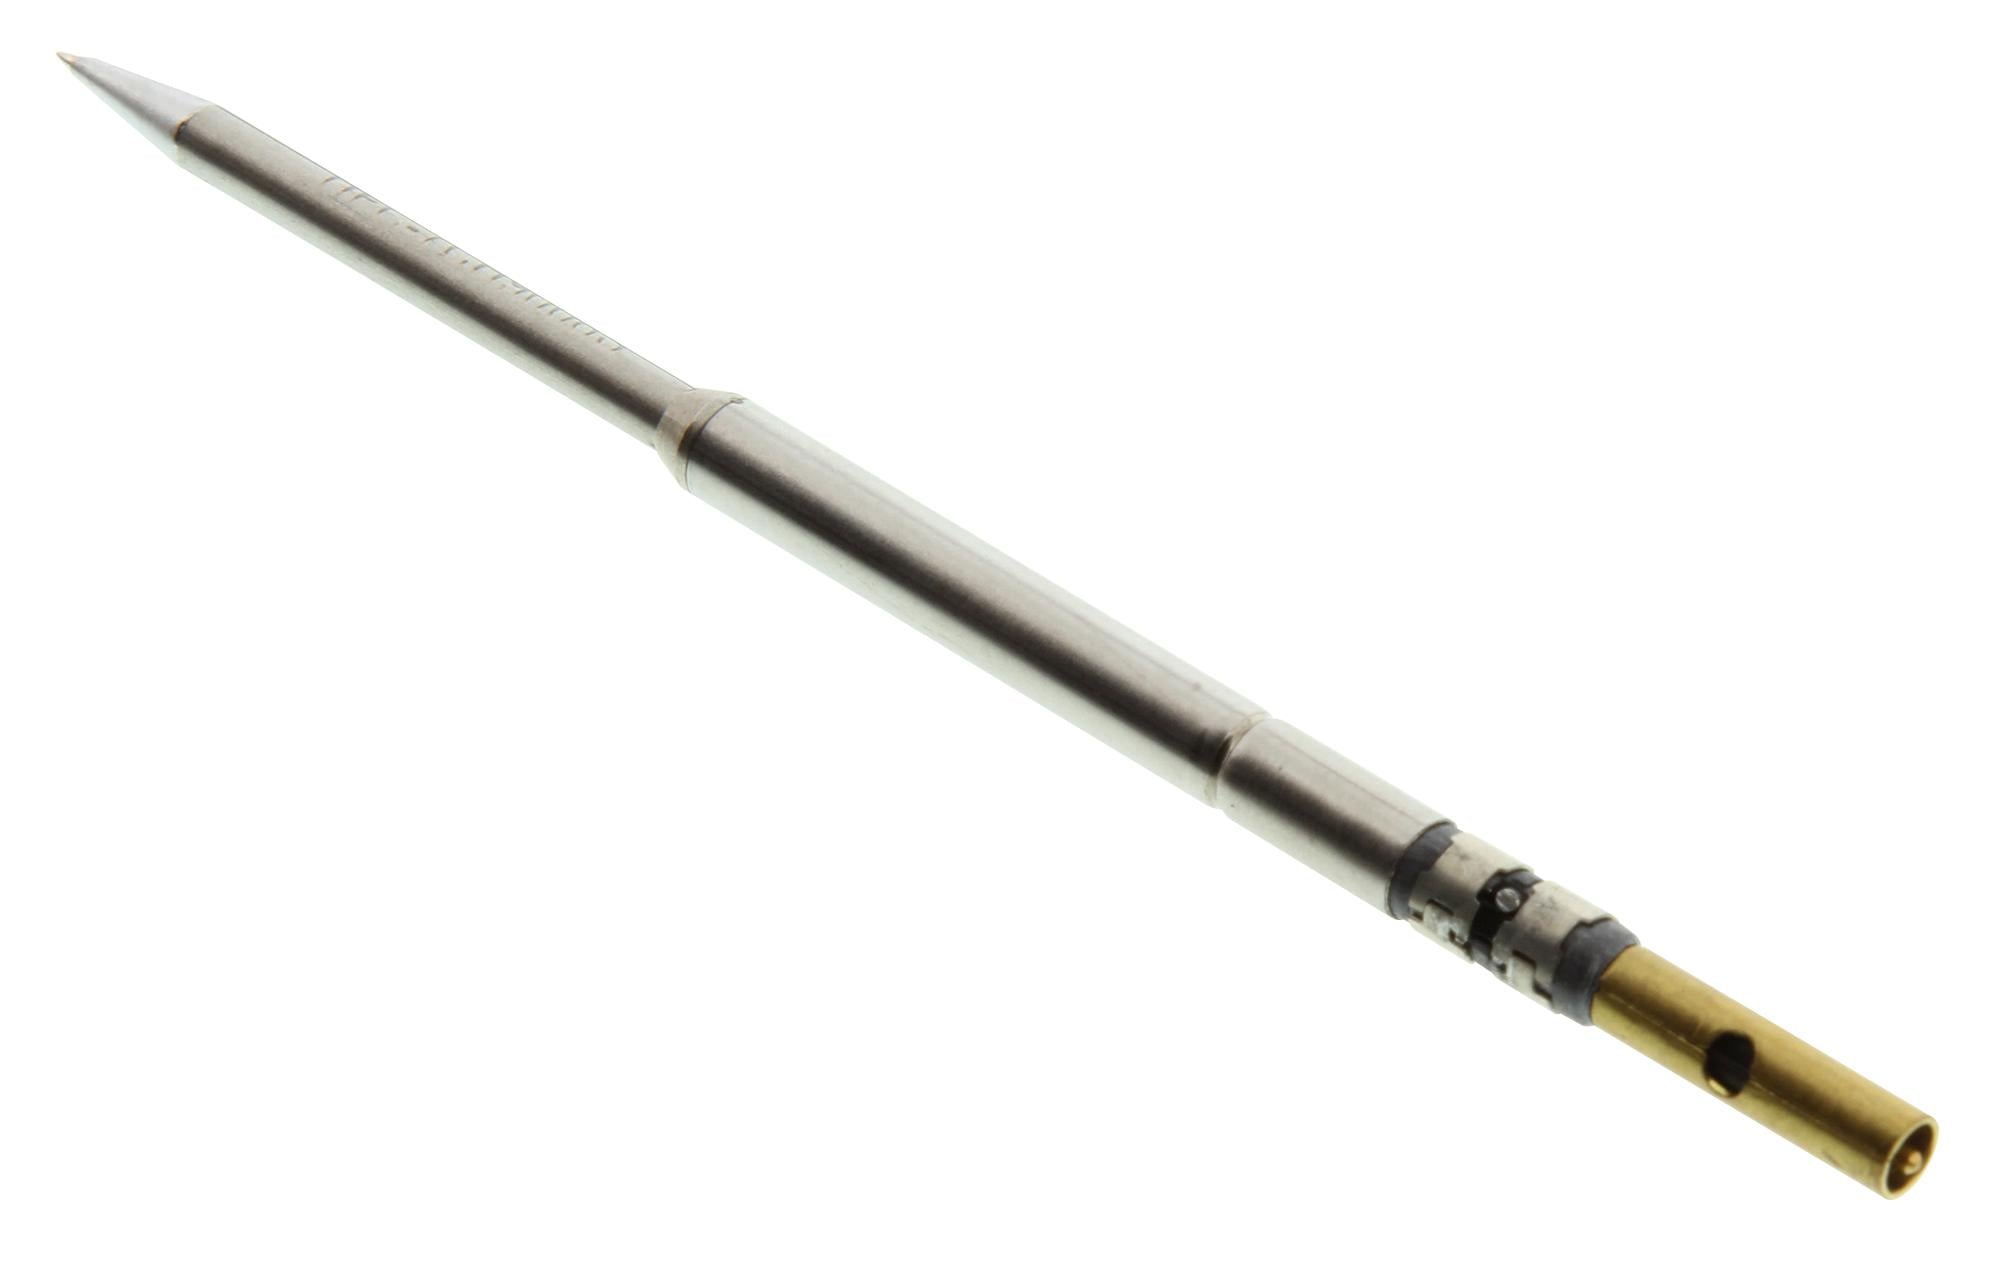 UFC-7CH9008S TIP, SOLDERING IRON, CHISEL, LONG, 0.8MM METCAL